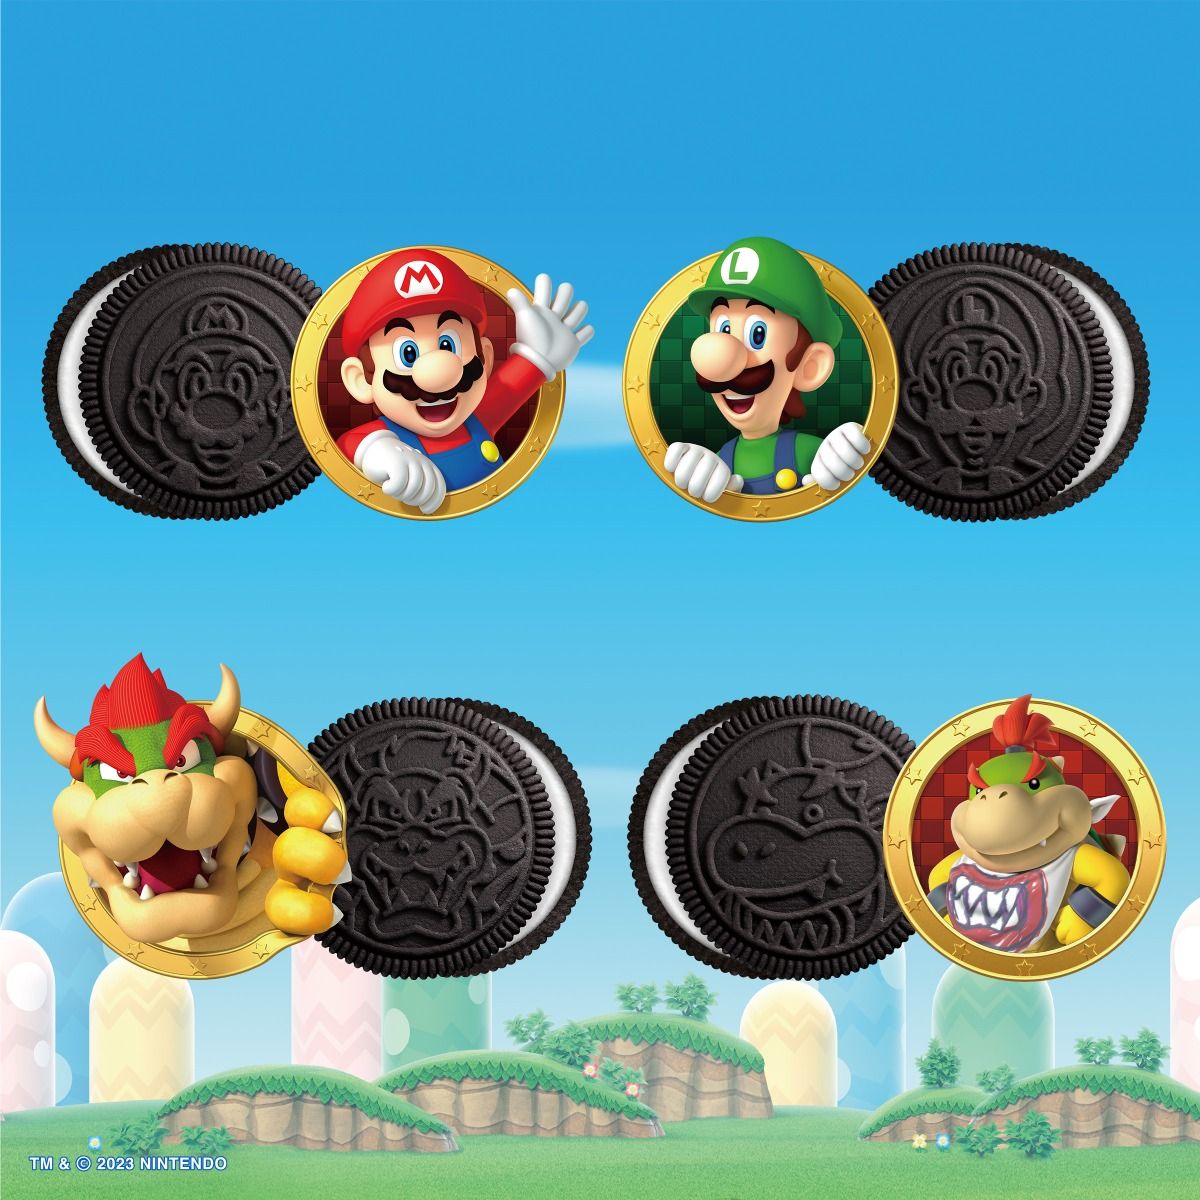 Super Mario™ OREO Chocolate Sandwich Cookies, Limited Edition - EXPIRED - ONLY FOR COLLECTORS